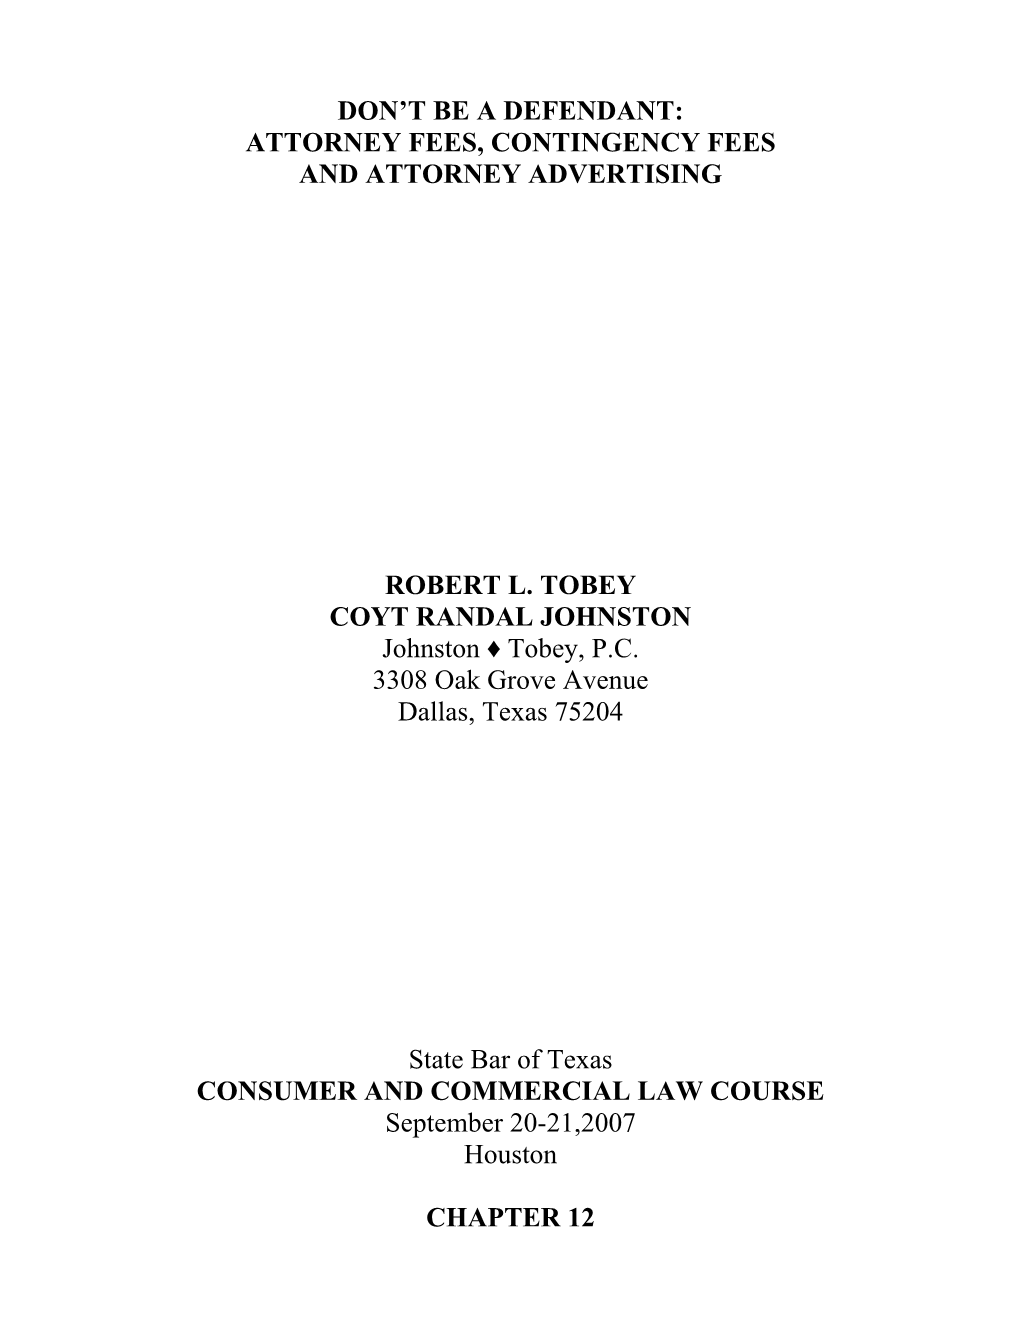 Attorney Fees, Contingency Fees and Attorney Advertising